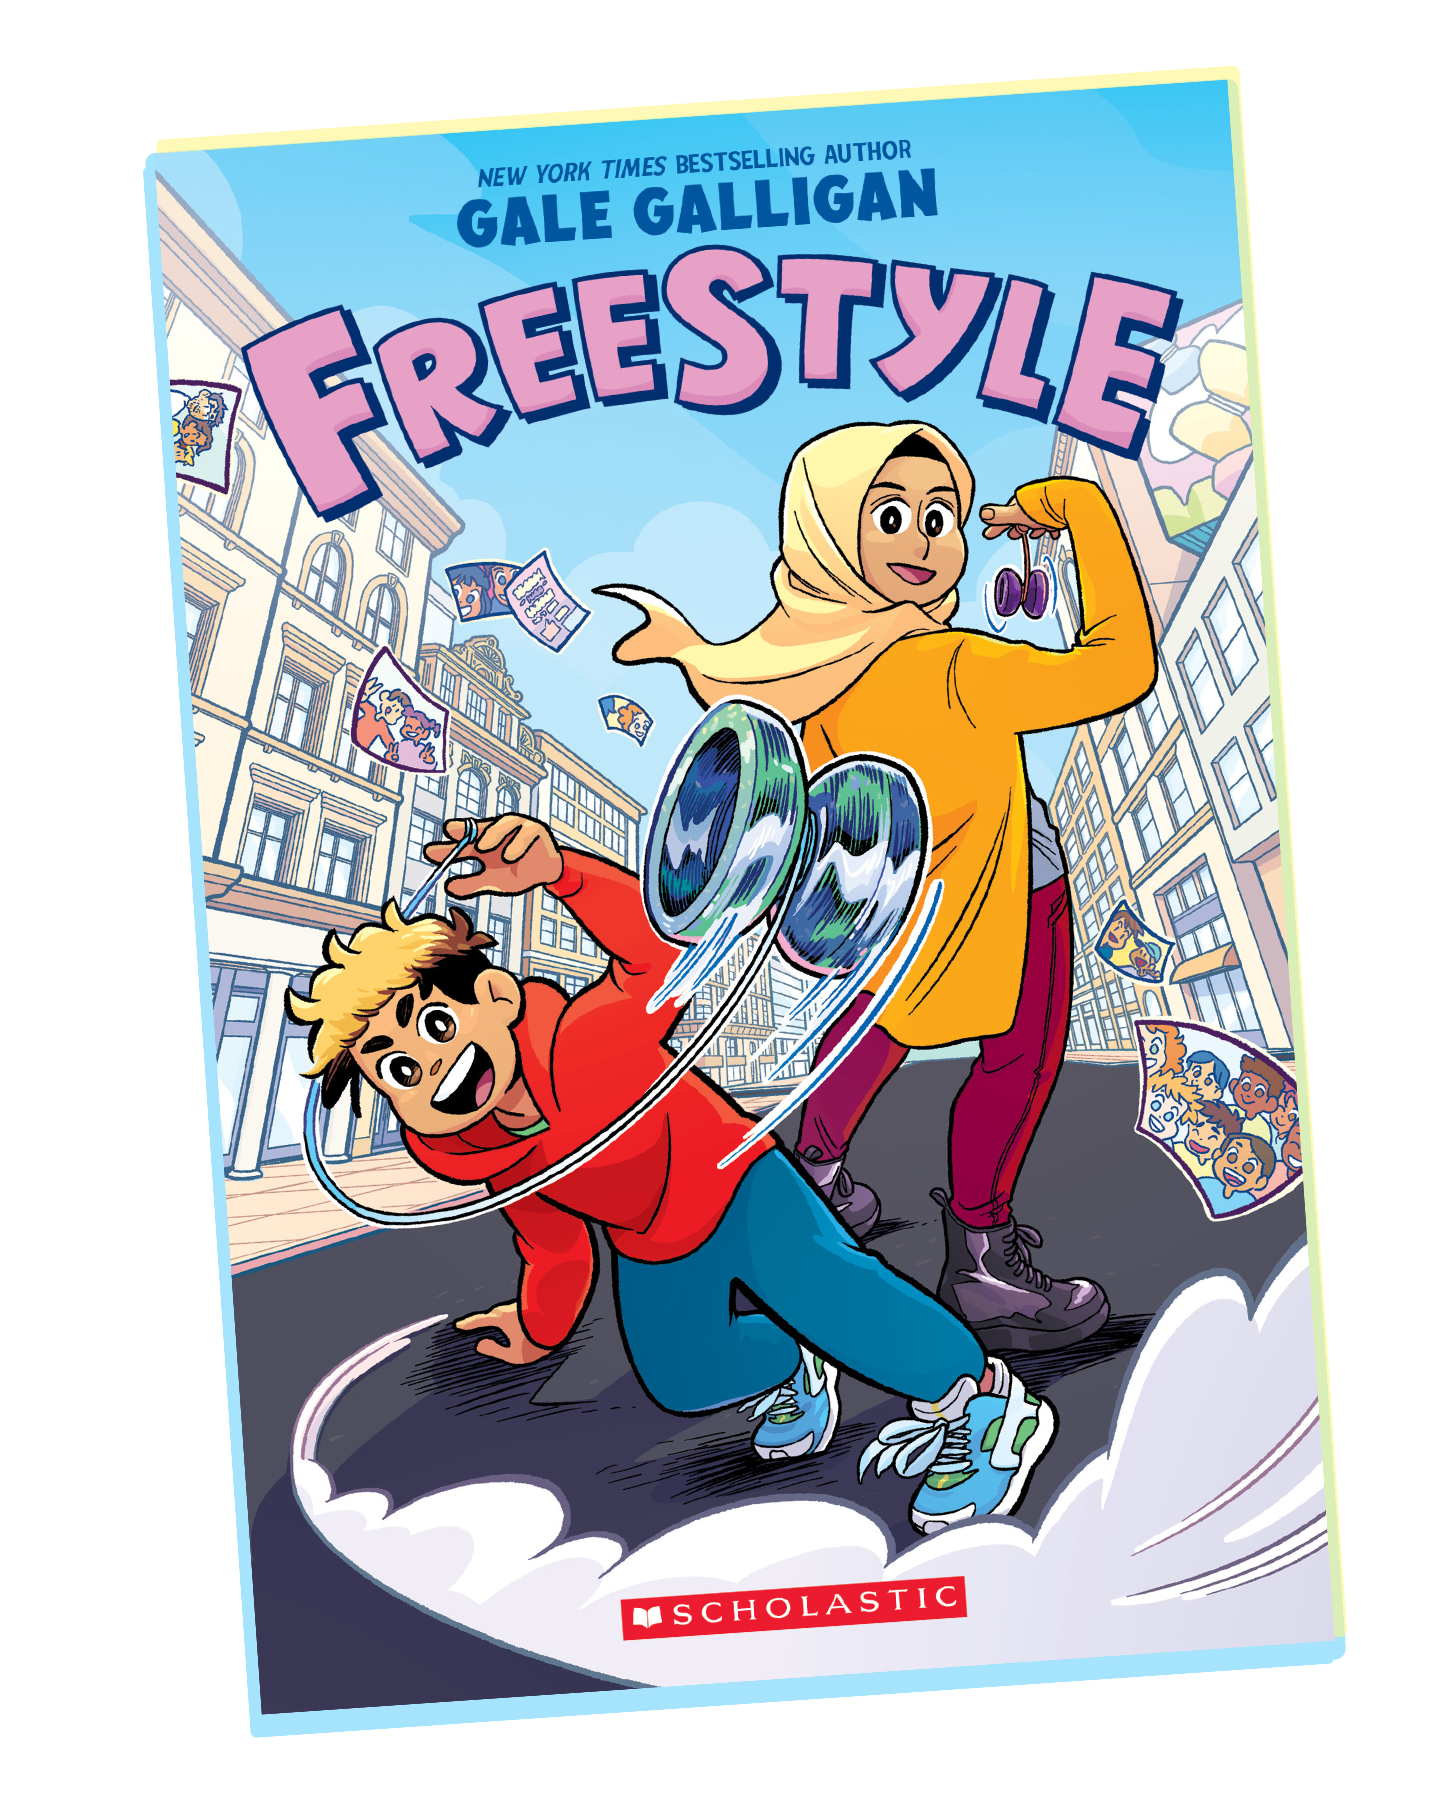 The cover for a graphic novel named FREESTYLE by Gale Galligan. Two children pose with yo-yos in front of a city street.